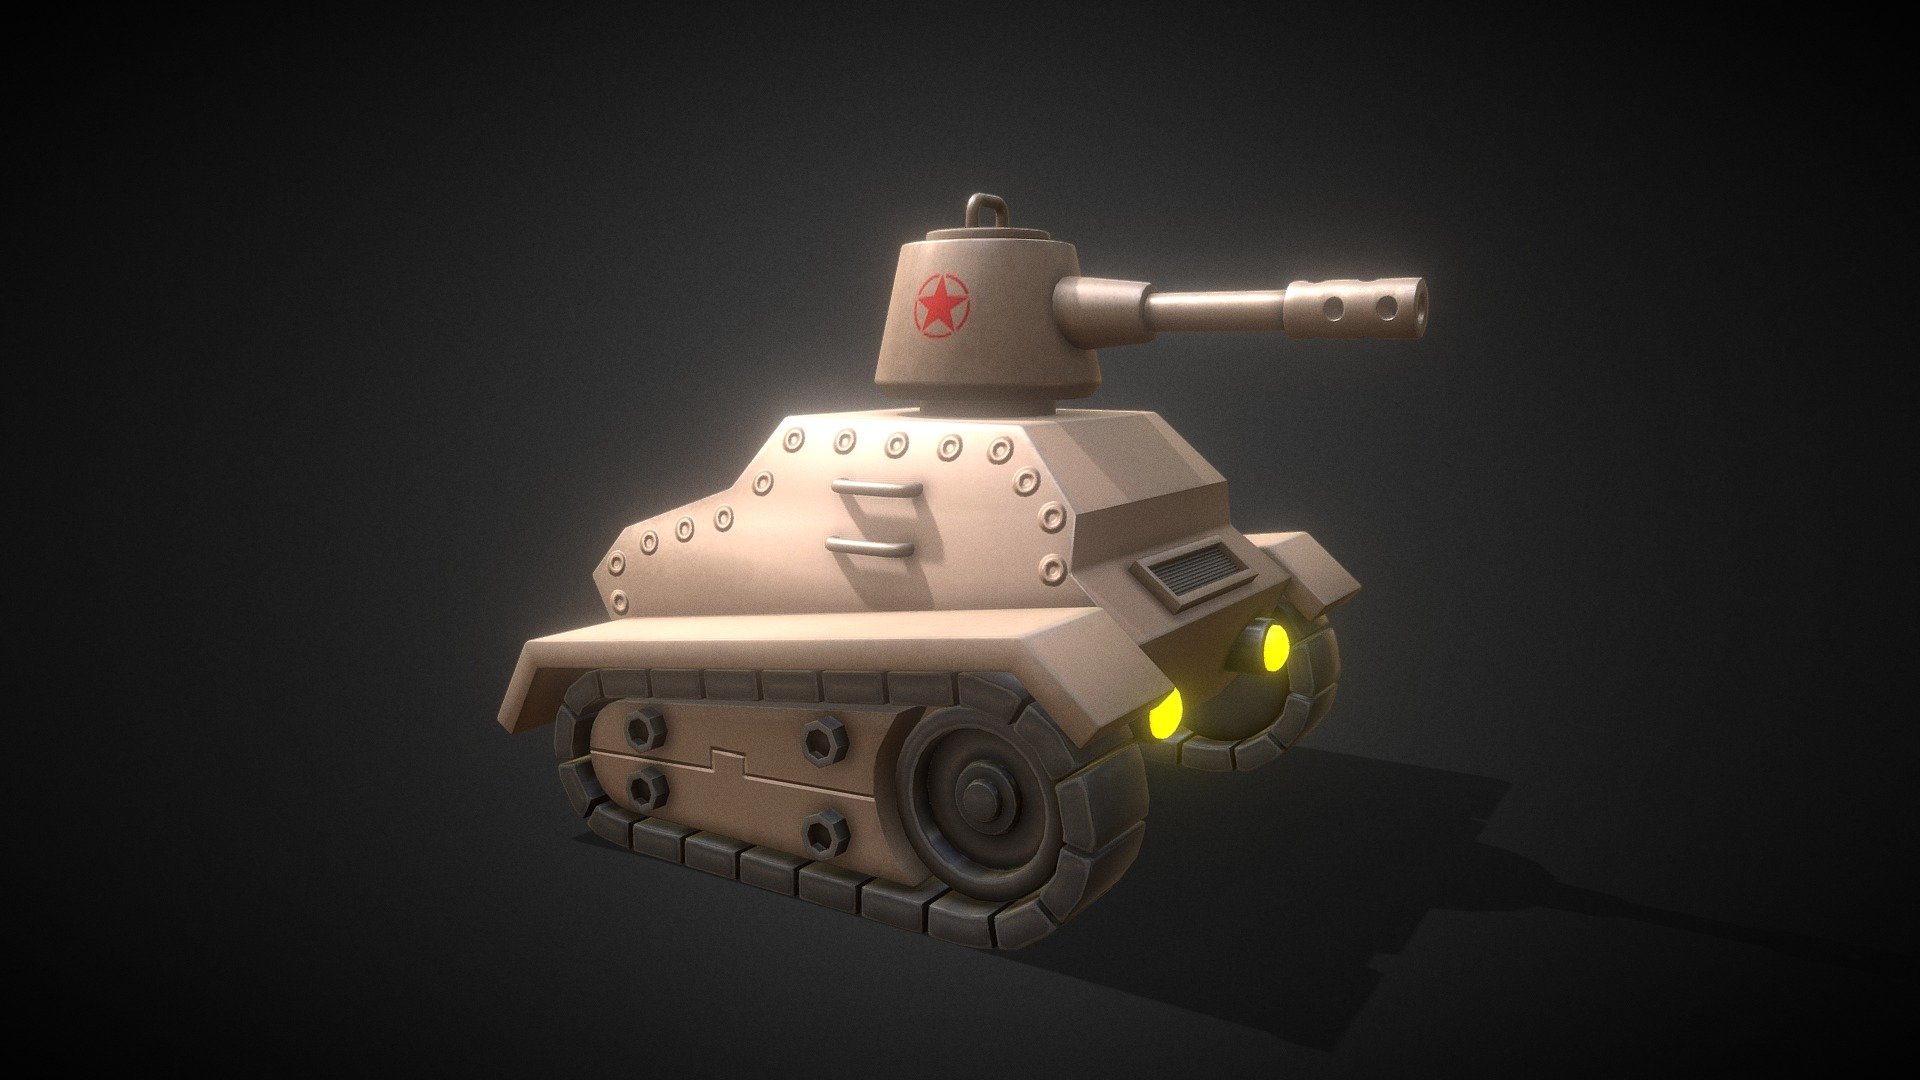 Tutorial here: https://www.youtube.com/channel/UC3R6lDf-Rlb9QW-D3CnhR7w

The model works perfectly in close-ups and high quality renders. It was originally modelled in 3ds Max 16, textured in Substance Painter and rendered with Marmoset Toolbag 3.

What is in the archive: MAX_16; OBJ; FBX ; Textures (2k resolution)

Features: Model resolutions are optimized for polygon efficiency. Model is fully textured with all materials applied. All textures and materials are included and mapped in every format. Autodesk 3ds Max models grouped for easy selection &amp; objects are logically named for ease of scene management. No cleaning up necessary, just drop model into your scene and start rendering. No special plugin needed to open scene.

Textures formats: PNG (2K) - Stylized Tank - Tutorial Included - Buy Royalty Free 3D model by ninashaw 3d model